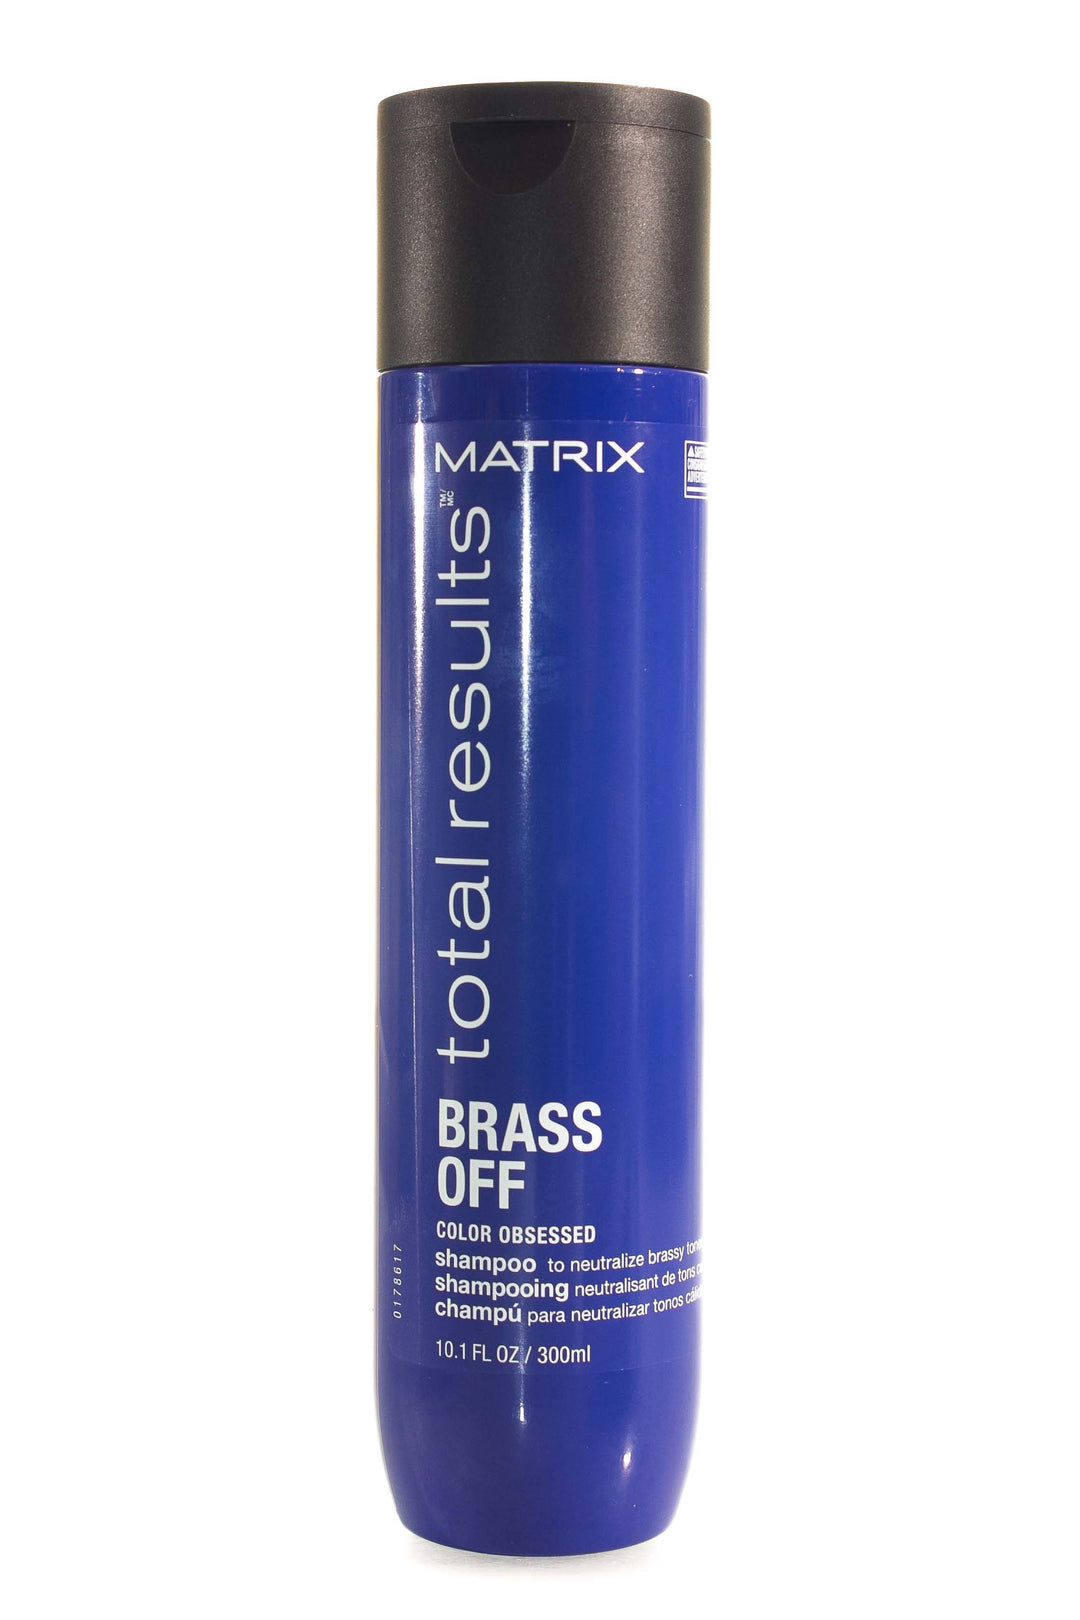 Product Image: Matrix Total Results Brass Off Shampoo - 300ml